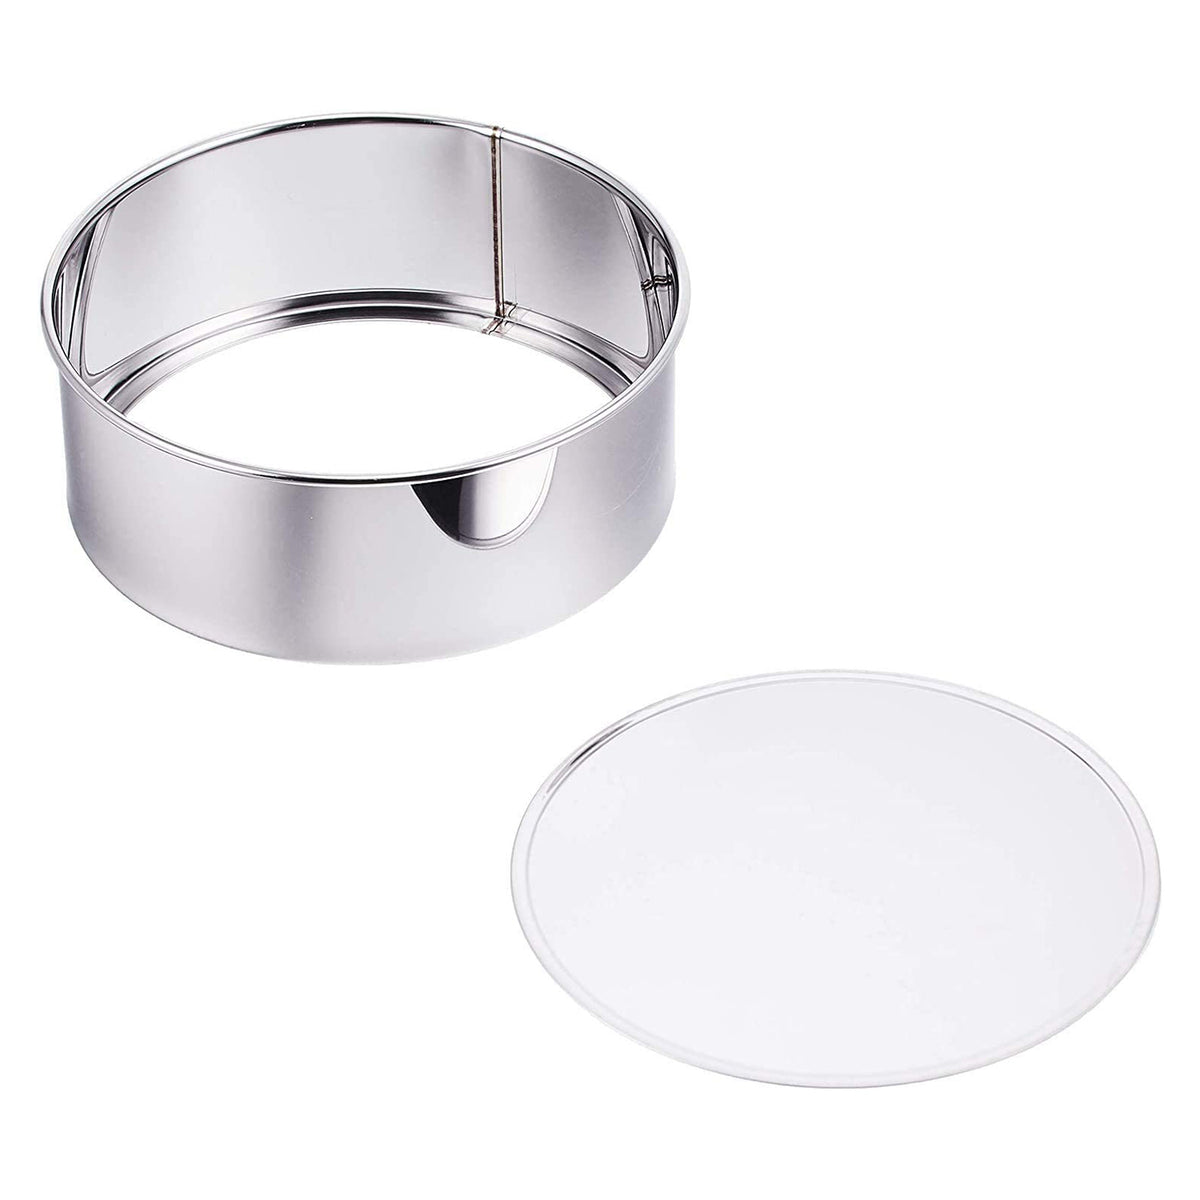 SHIMOTORI Stainless steel Round Cake Pan with Removable Bottom